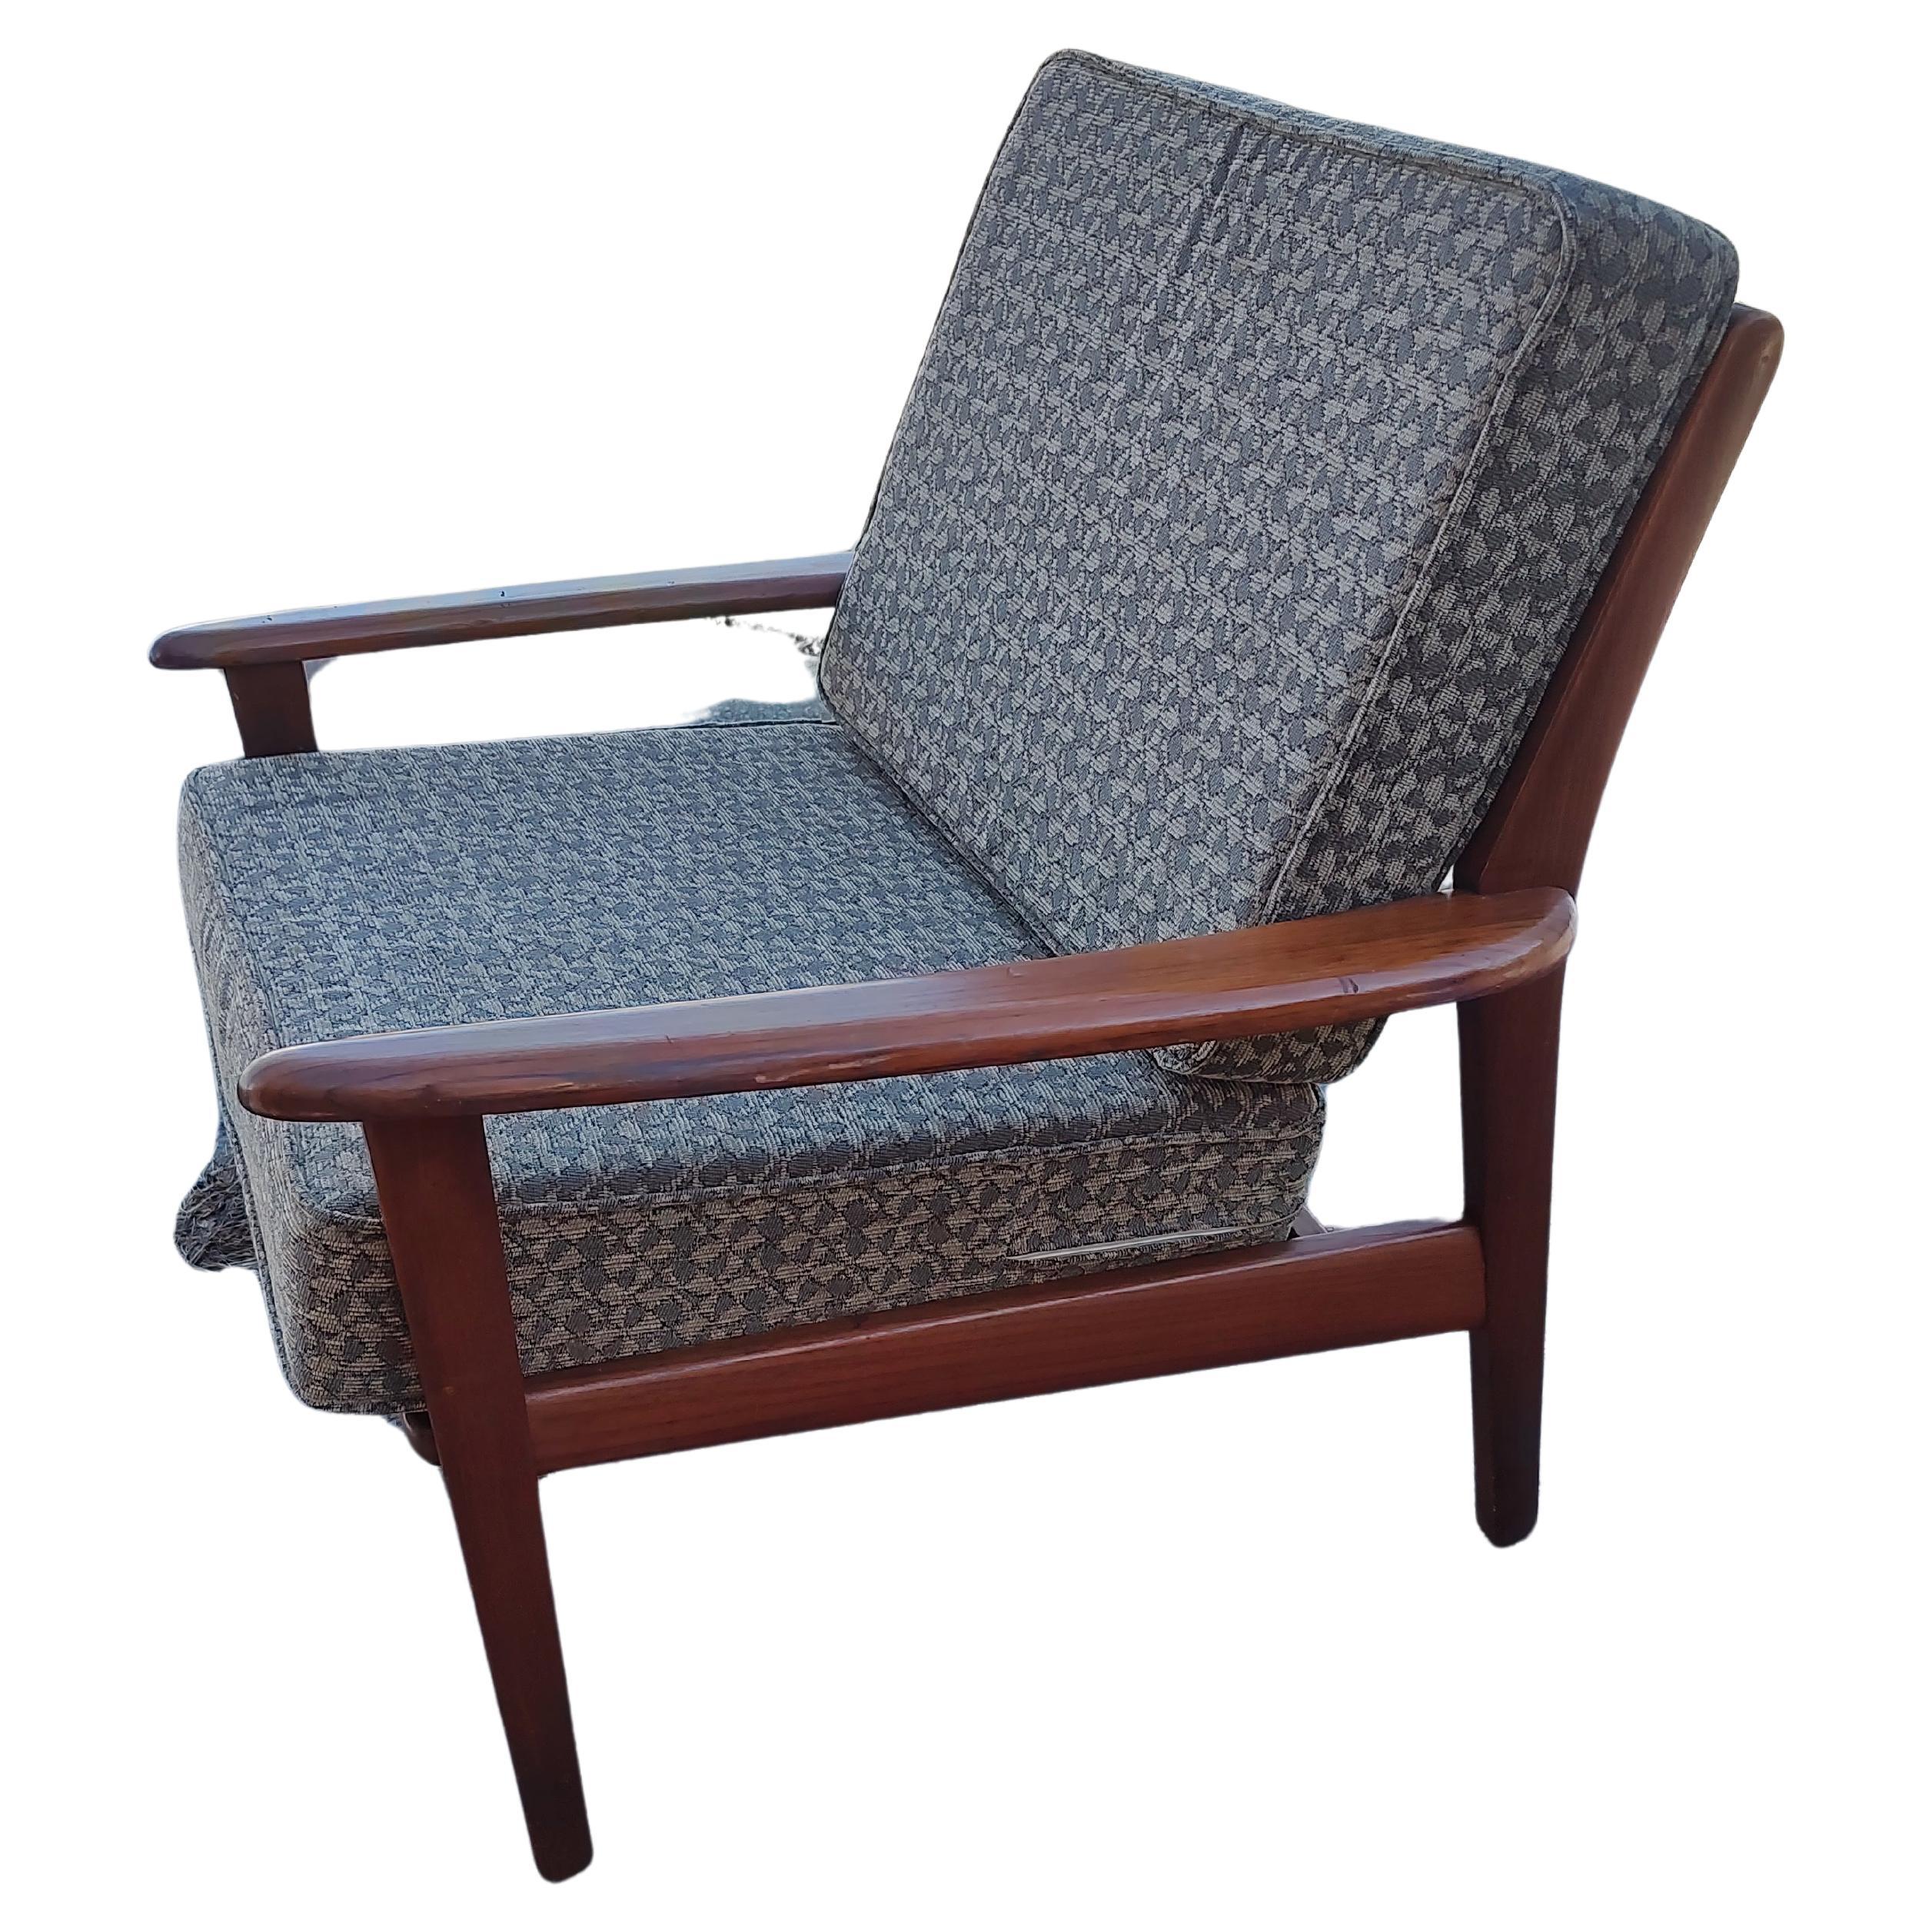 Mid Century Danish Modern Teak Lounge Chair C1958 In Good Condition For Sale In Port Jervis, NY